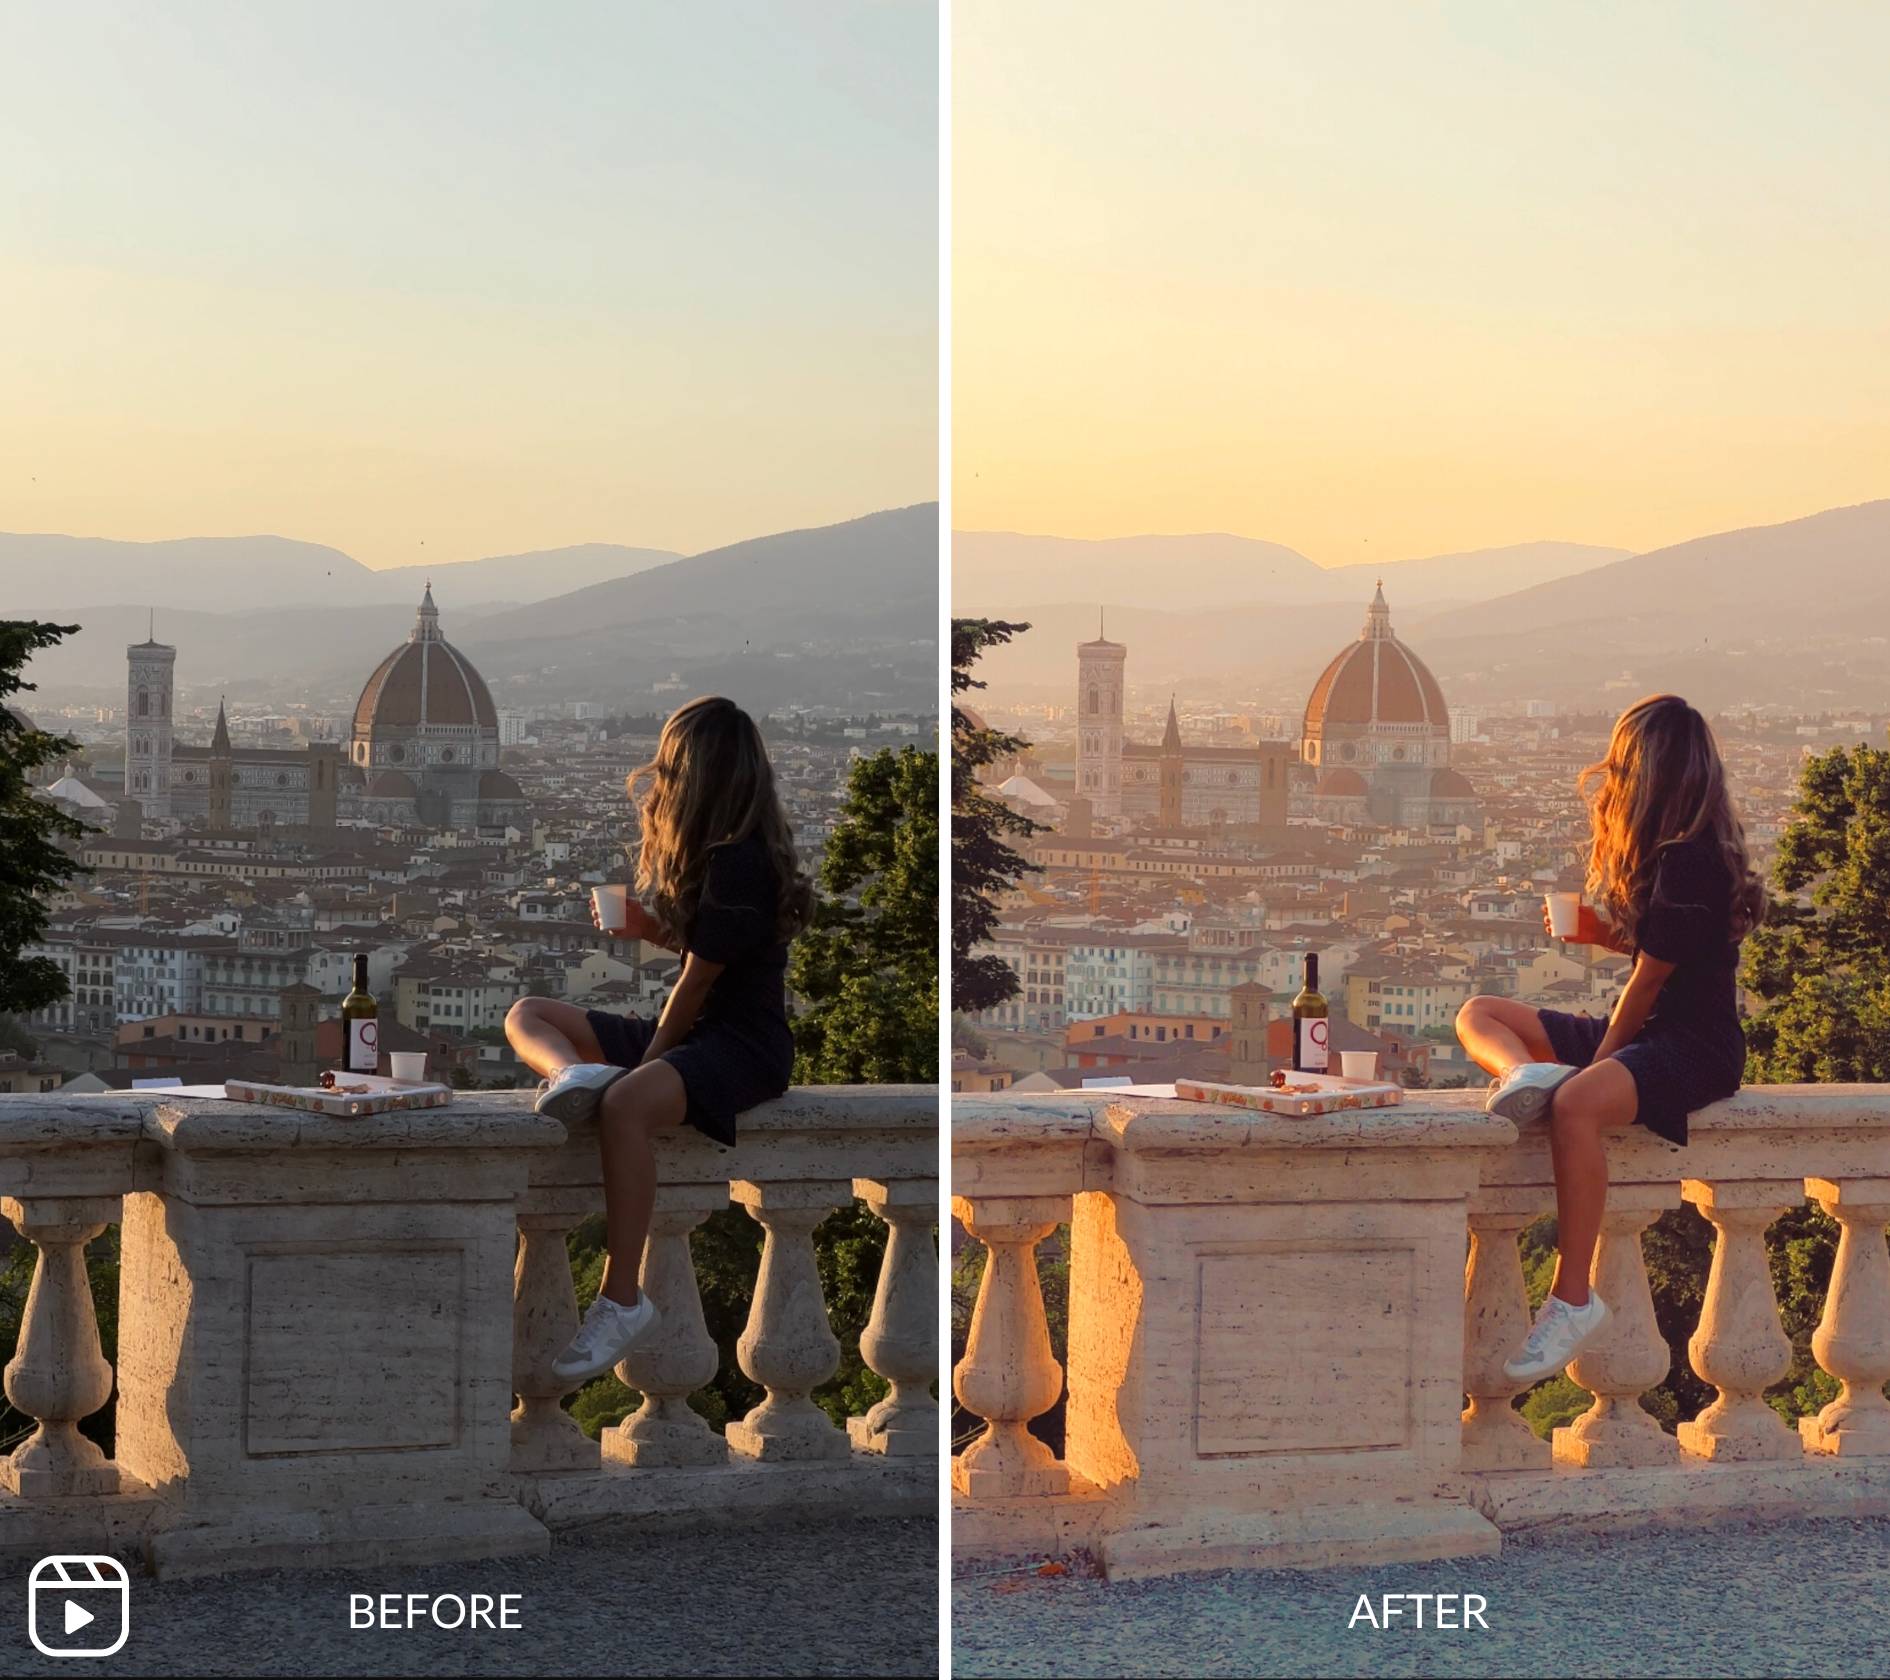 Before and after editing with mobile video filters